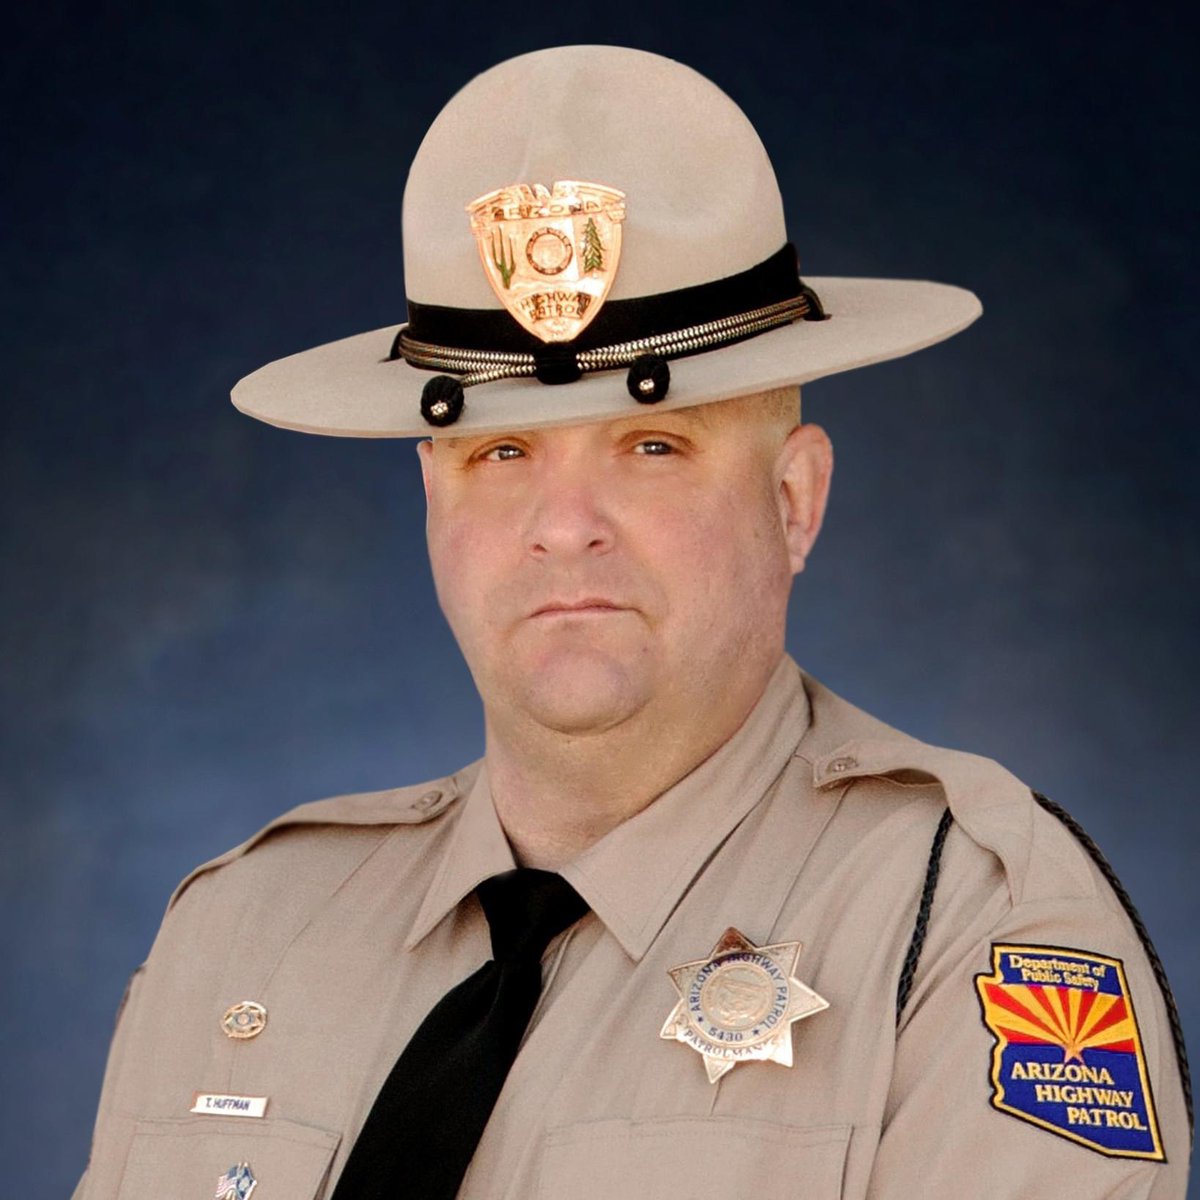 #NeverForget Officer Timothy Huffman #5430 who paid the ultimate sacrifice on 5/6/2013. He was struck and killed by a semi-truck while in his patrol car at a collision scene. The truck driver was distracted by his phone. 

#AZTroopers #LODD #BackTheBlue